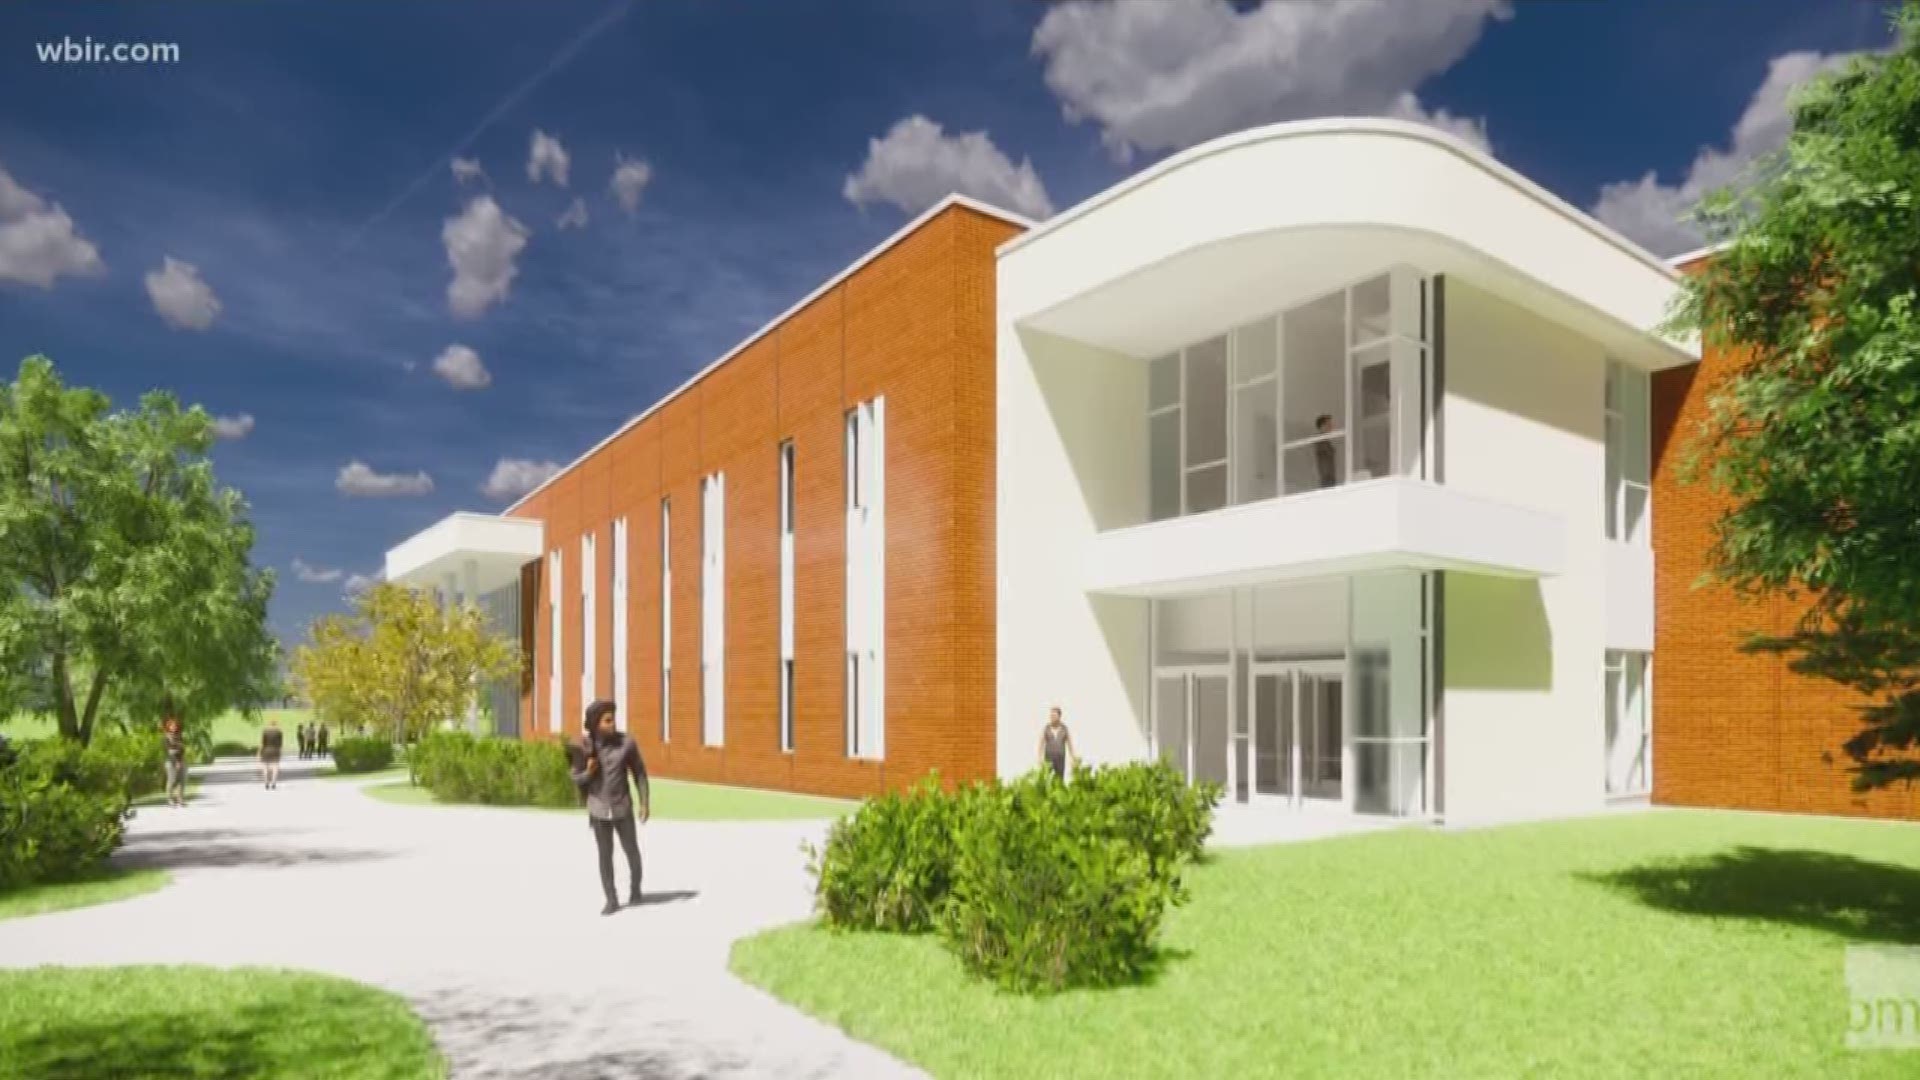 Officials announced plans Friday to build a science and math building on its Hardin Valley Campus in Knoxville and a workforce development center on its Blount County Campus in Friendsville.